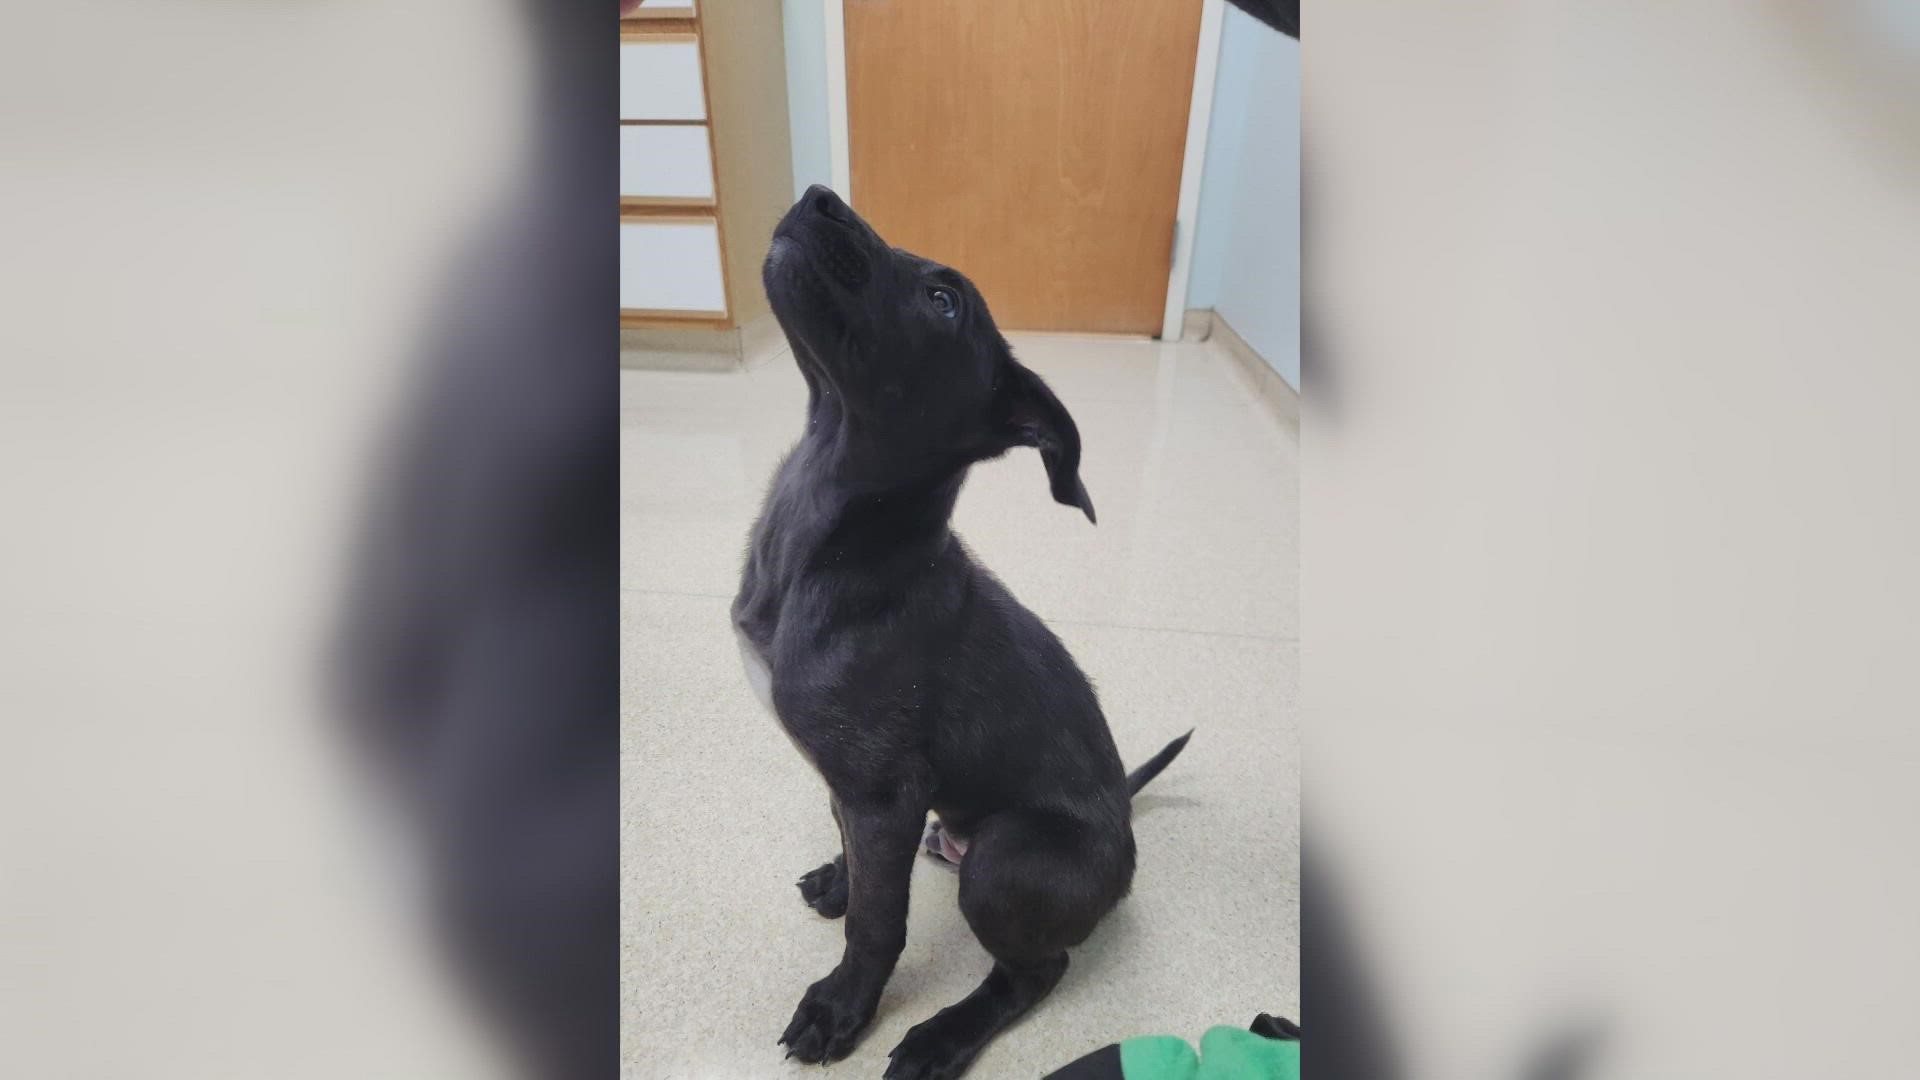 The Morgan Co. Mutts Rescue Center shared a photo of the puppy who is now in foster care. Officials said he's doing well, learning to trust and his legs are better.